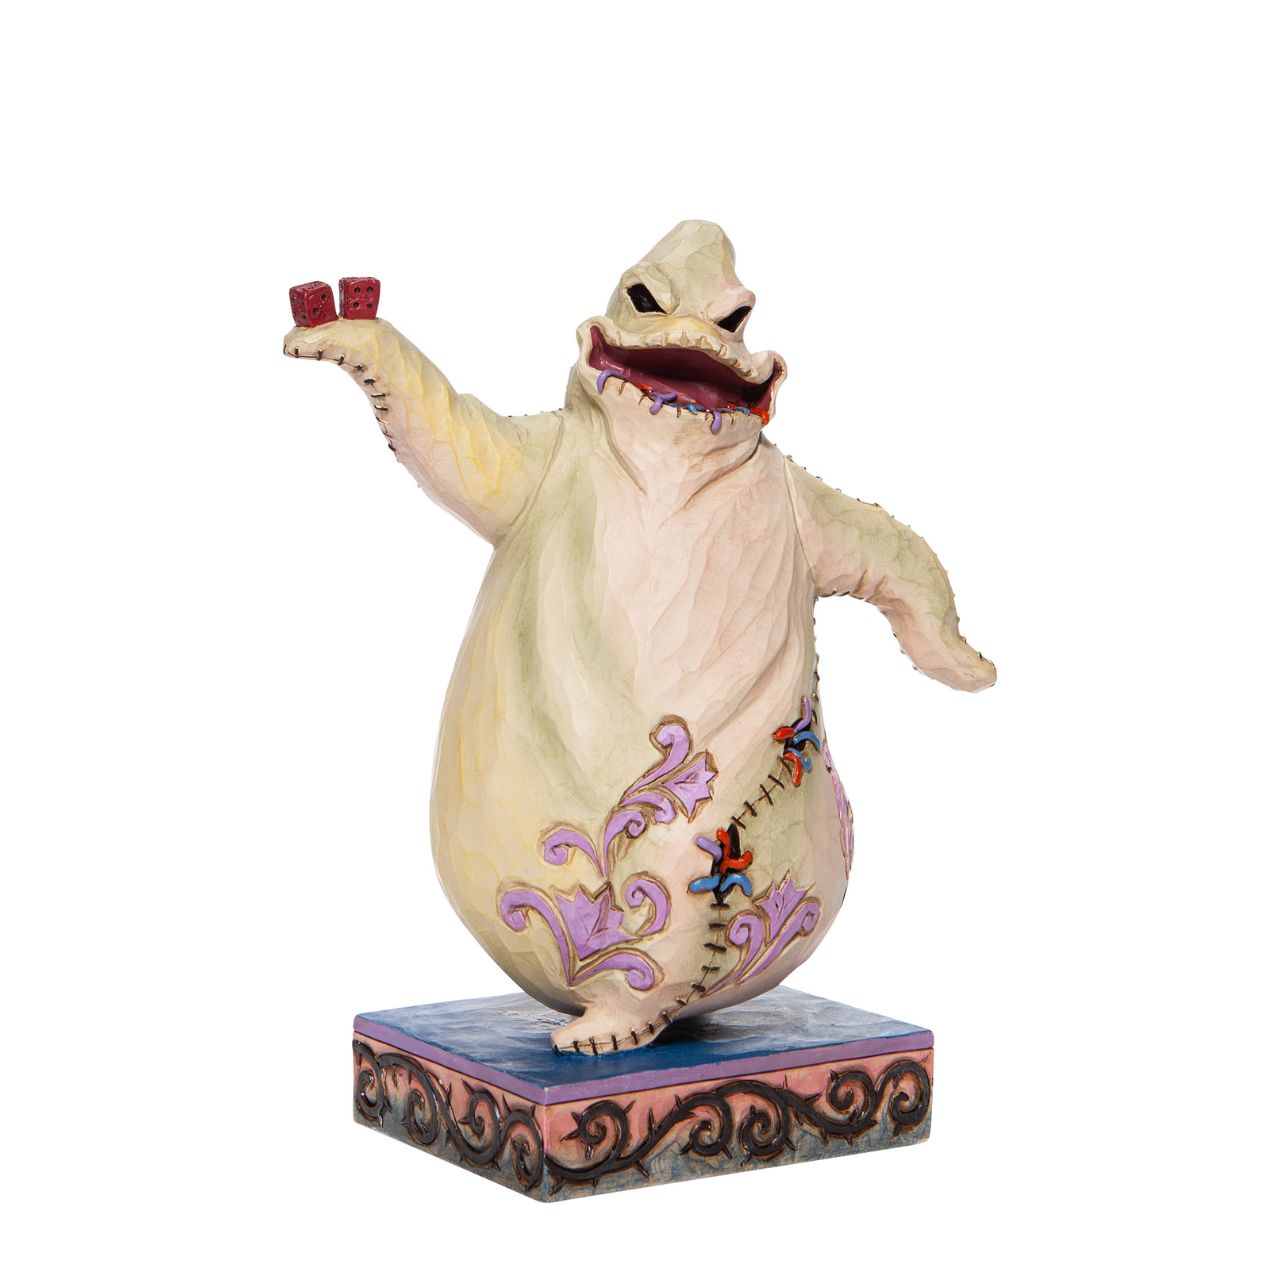 Oogie Boogie the main antagonist of Tim Burton's The Nightmare Before Christmas, strikes a sinister pose in this Jim Shore statuette. Resembling a burlap sack filled with bugs, the villain is profusely power hungry and diabolically negligent.